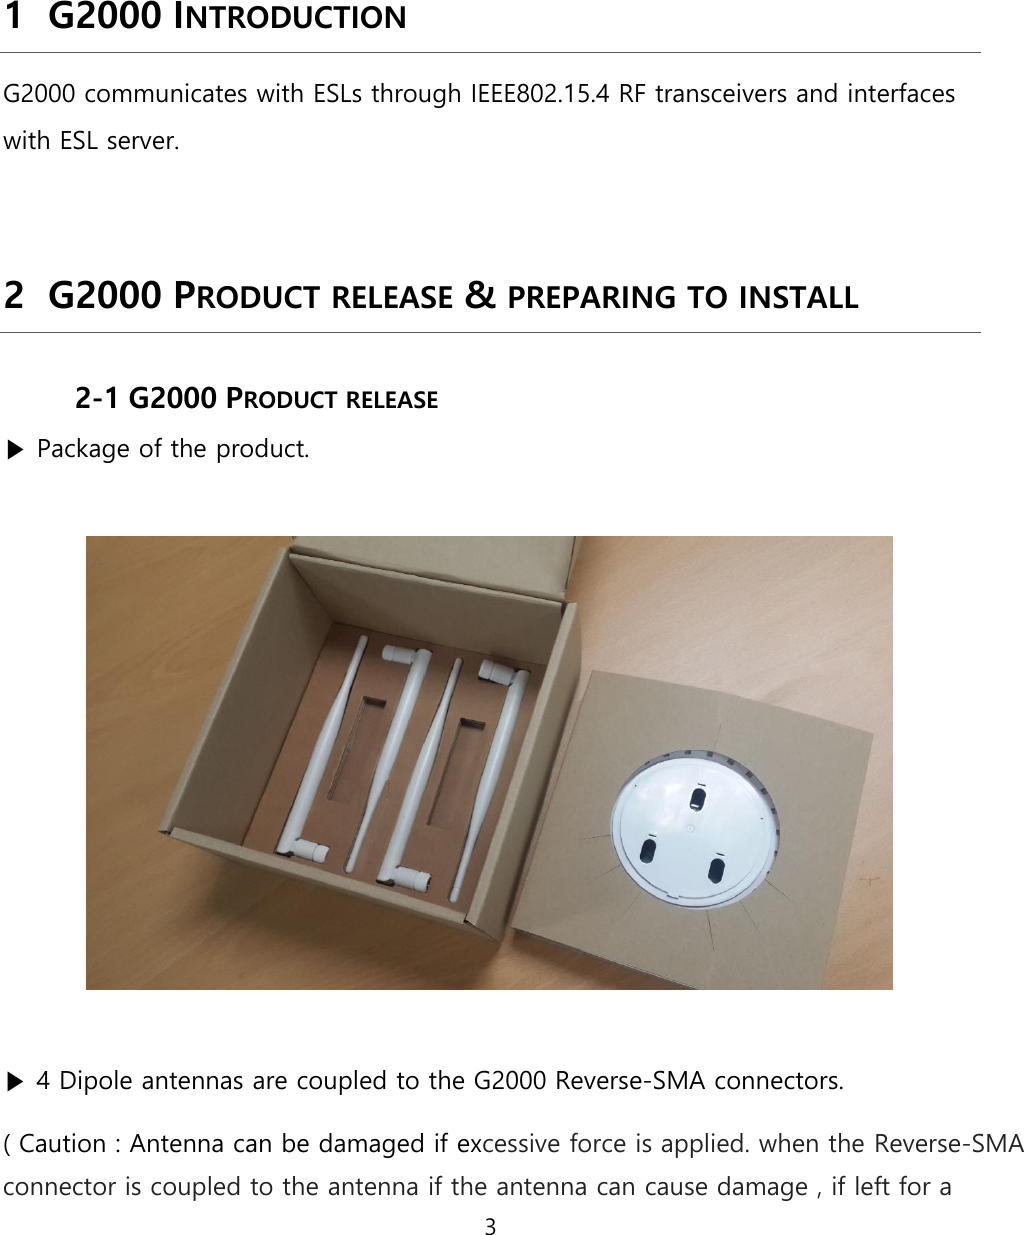 3 1 G2000 INTRODUCTION G2000 communicates with ESLs through IEEE802.15.4 RF transceivers and interfaces with ESL server. 2 G2000 PRODUCT RELEASE &amp; PREPARING TO INSTALL 2-1 G2000 PRODUCT RELEASE▶ Package of the product.▶ 4 Dipole antennas are coupled to the G2000 Reverse-SMA connectors. ( Caution : Antenna can be damaged if excessive force is applied. when the Reverse-SMA connector is coupled to the antenna if the antenna can cause damage , if left for a 